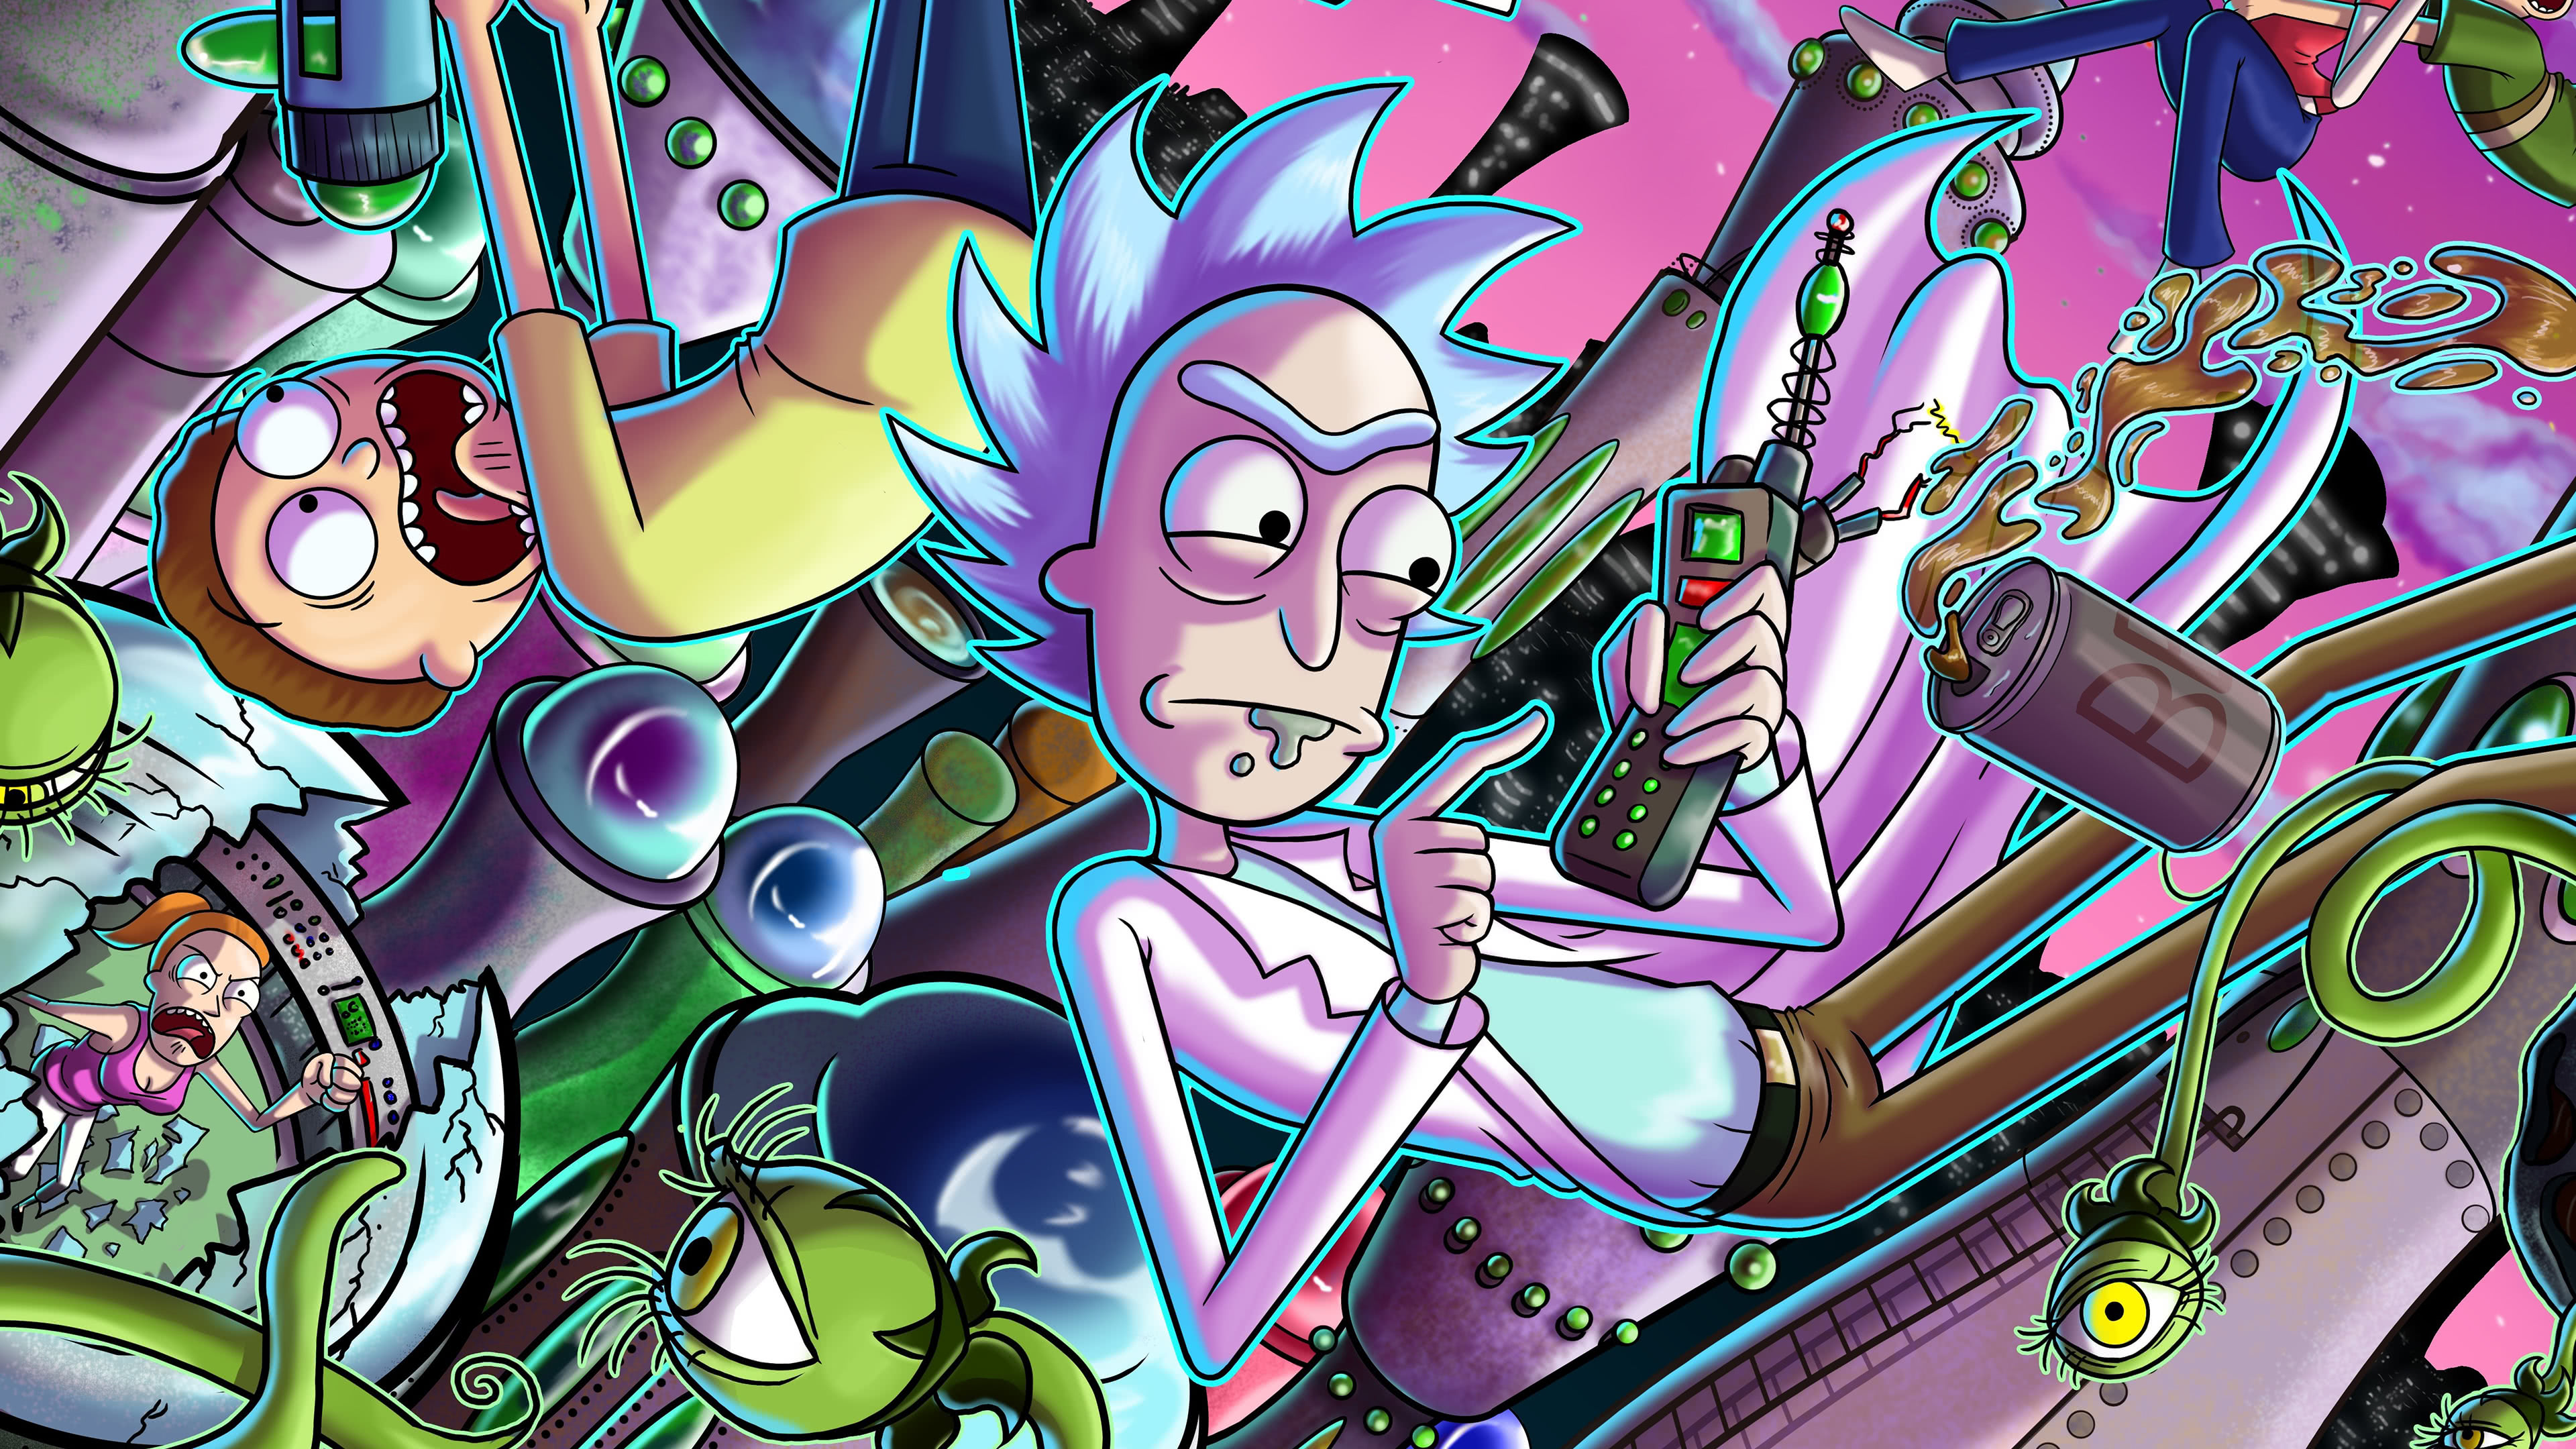 99 4k Rick And Morty Wallpaper I Created From Run The Jewels